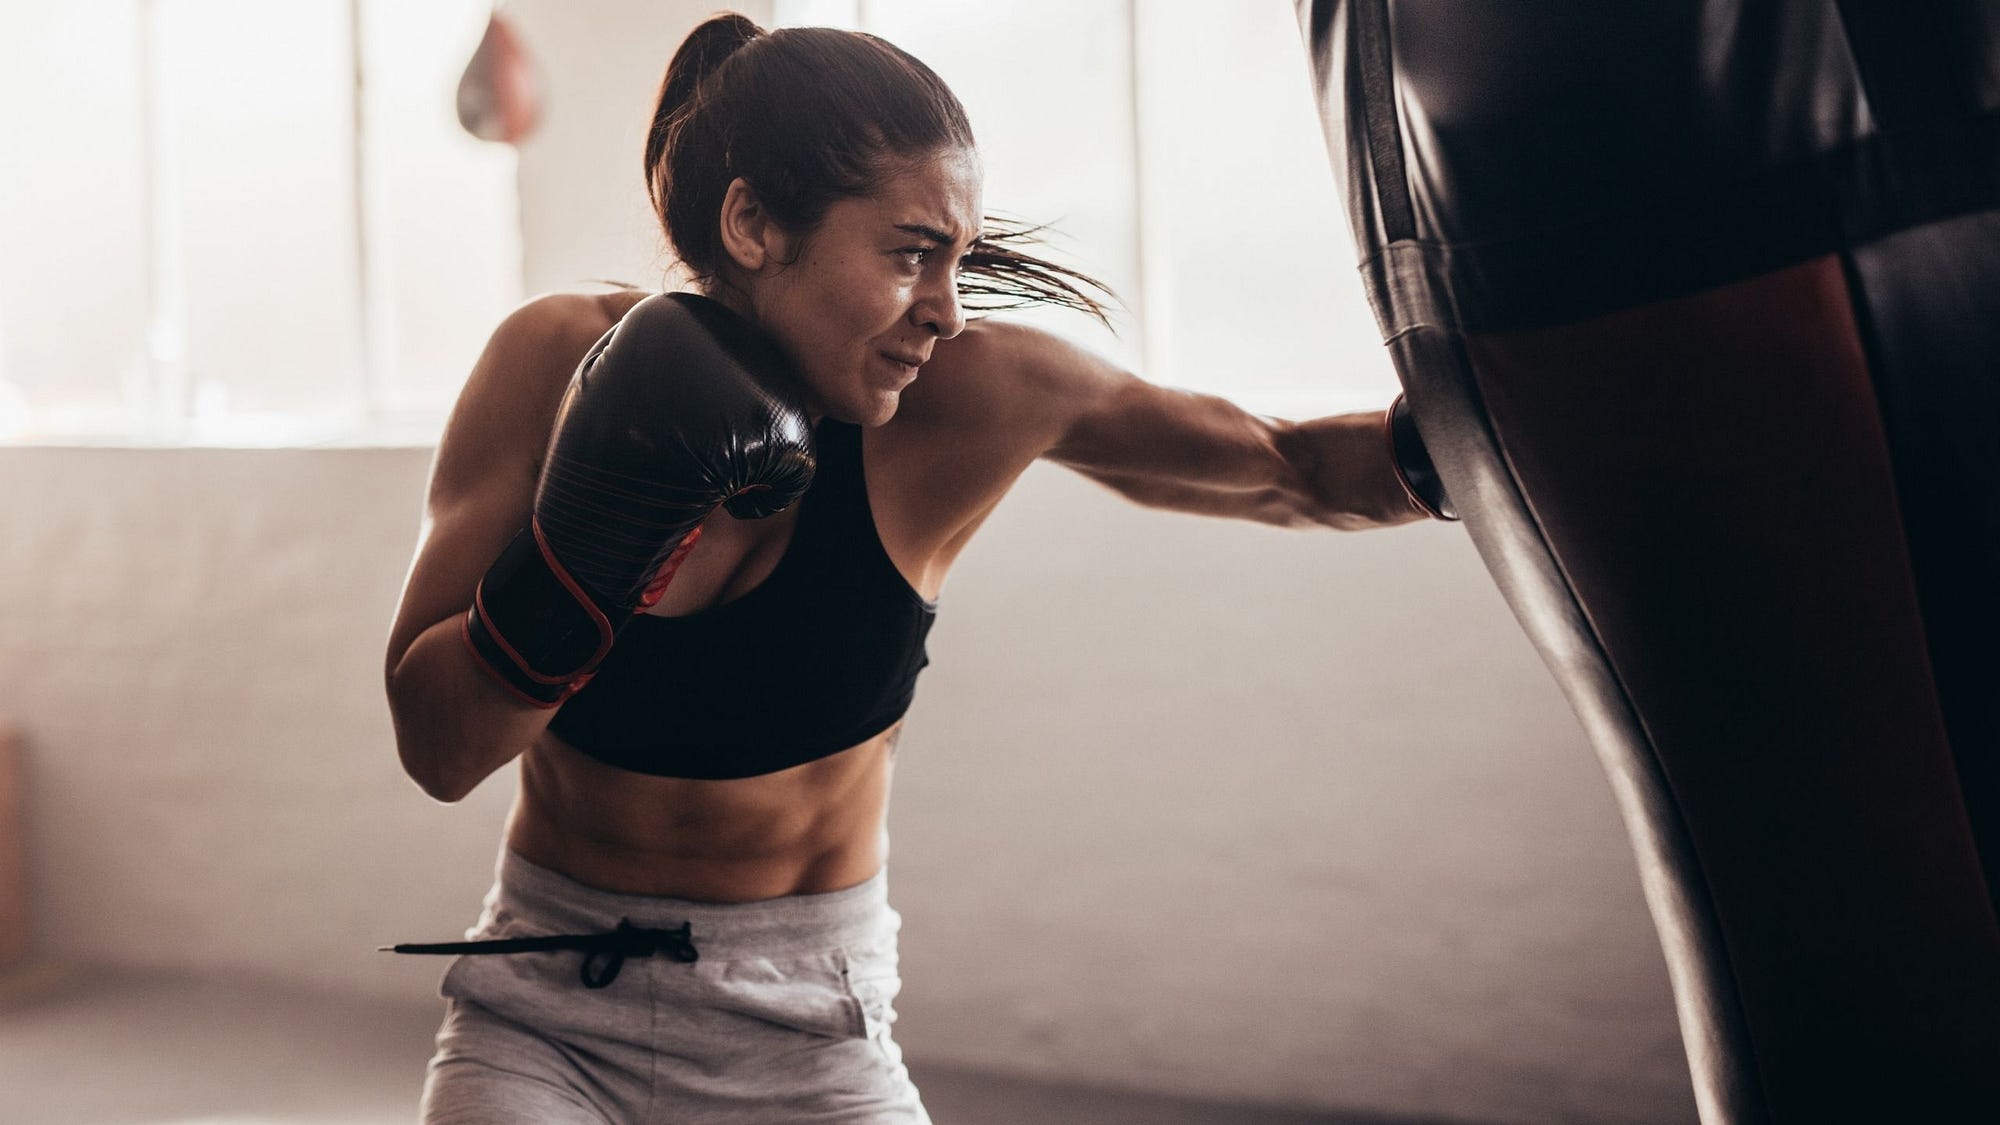 Boxing Workouts: 7 Best Workouts, Tips, Benefits, and More